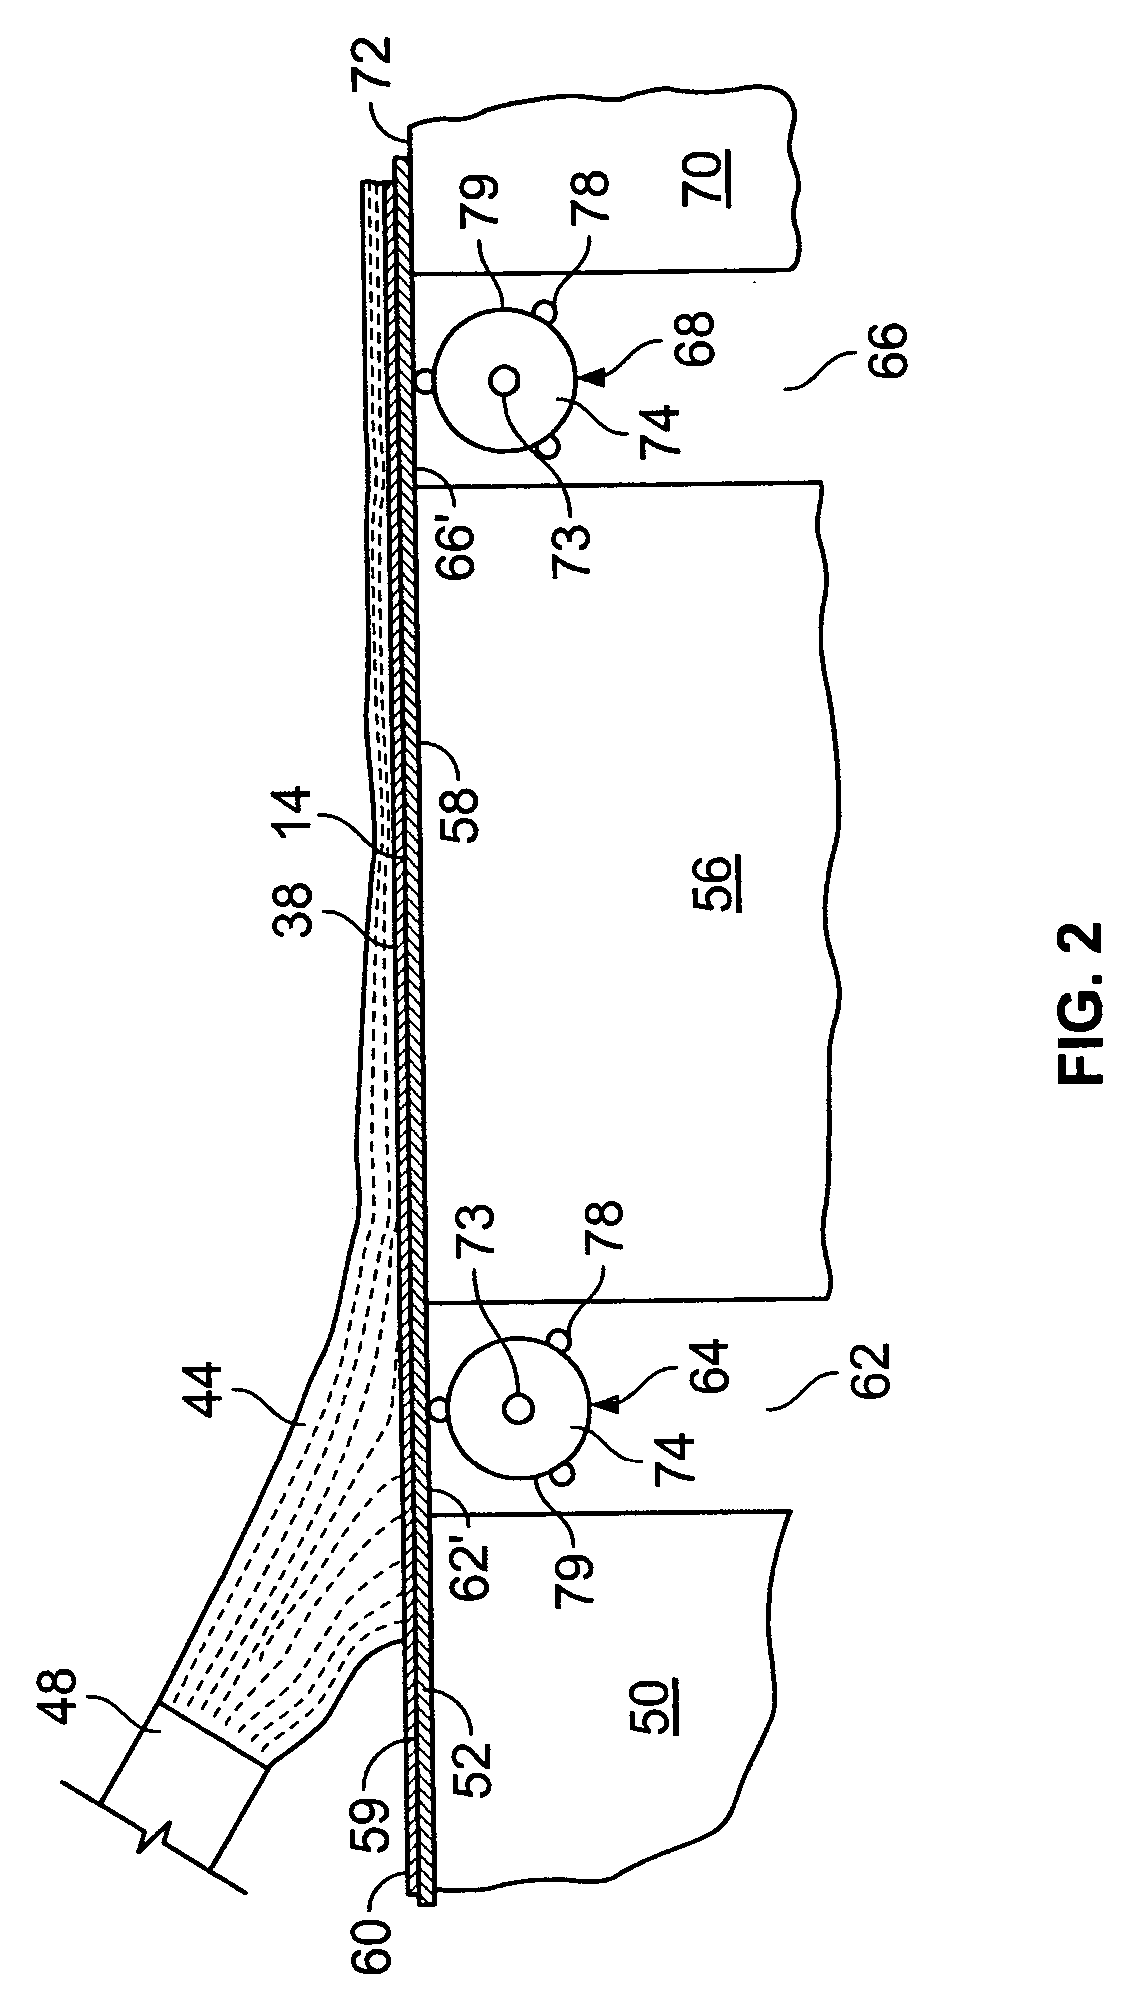 Method for targeted delivery of additives to varying layers in a glass reinforced gypsum panel and method of manufacture